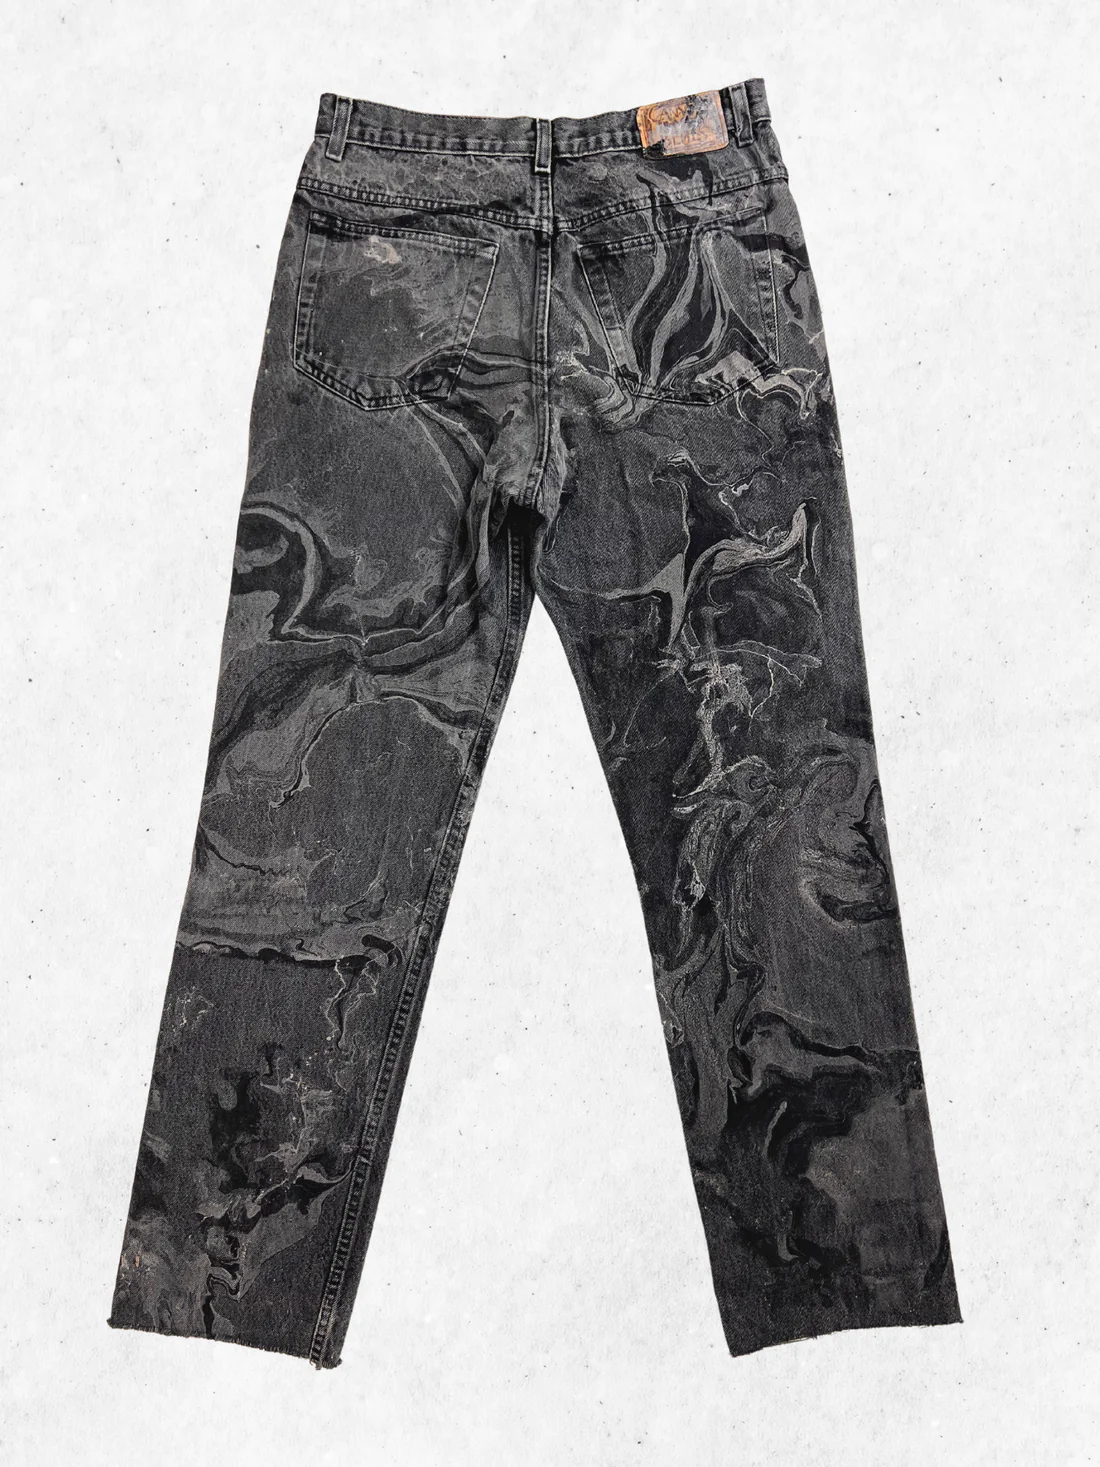 A pair of black and gray pants with a marble pattern.